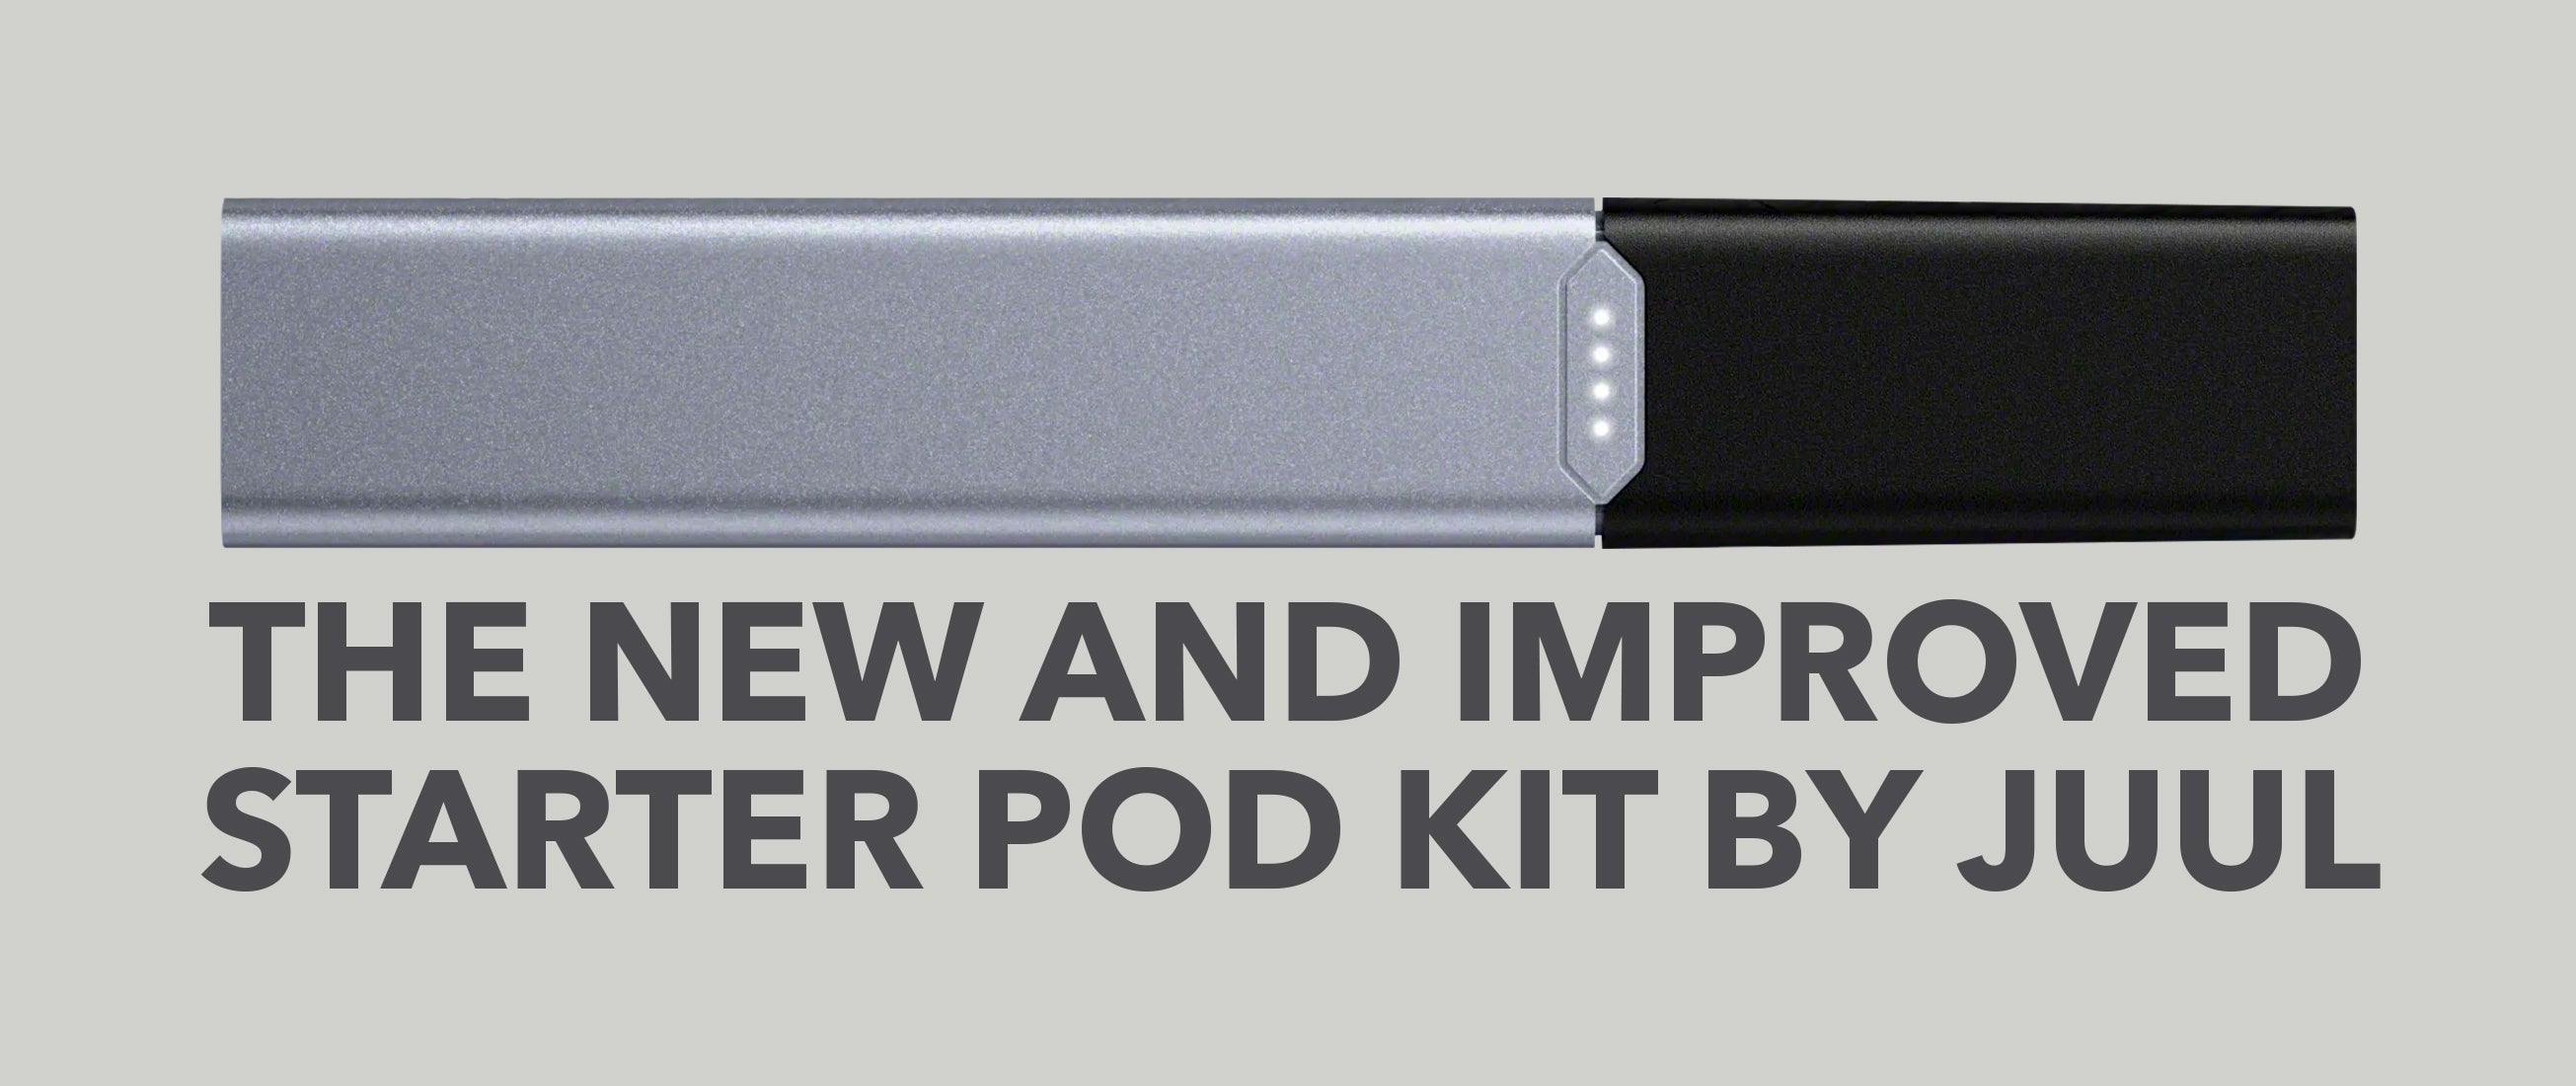 The JUUL2: Introducing JUUL’s new and improved starter pod kit